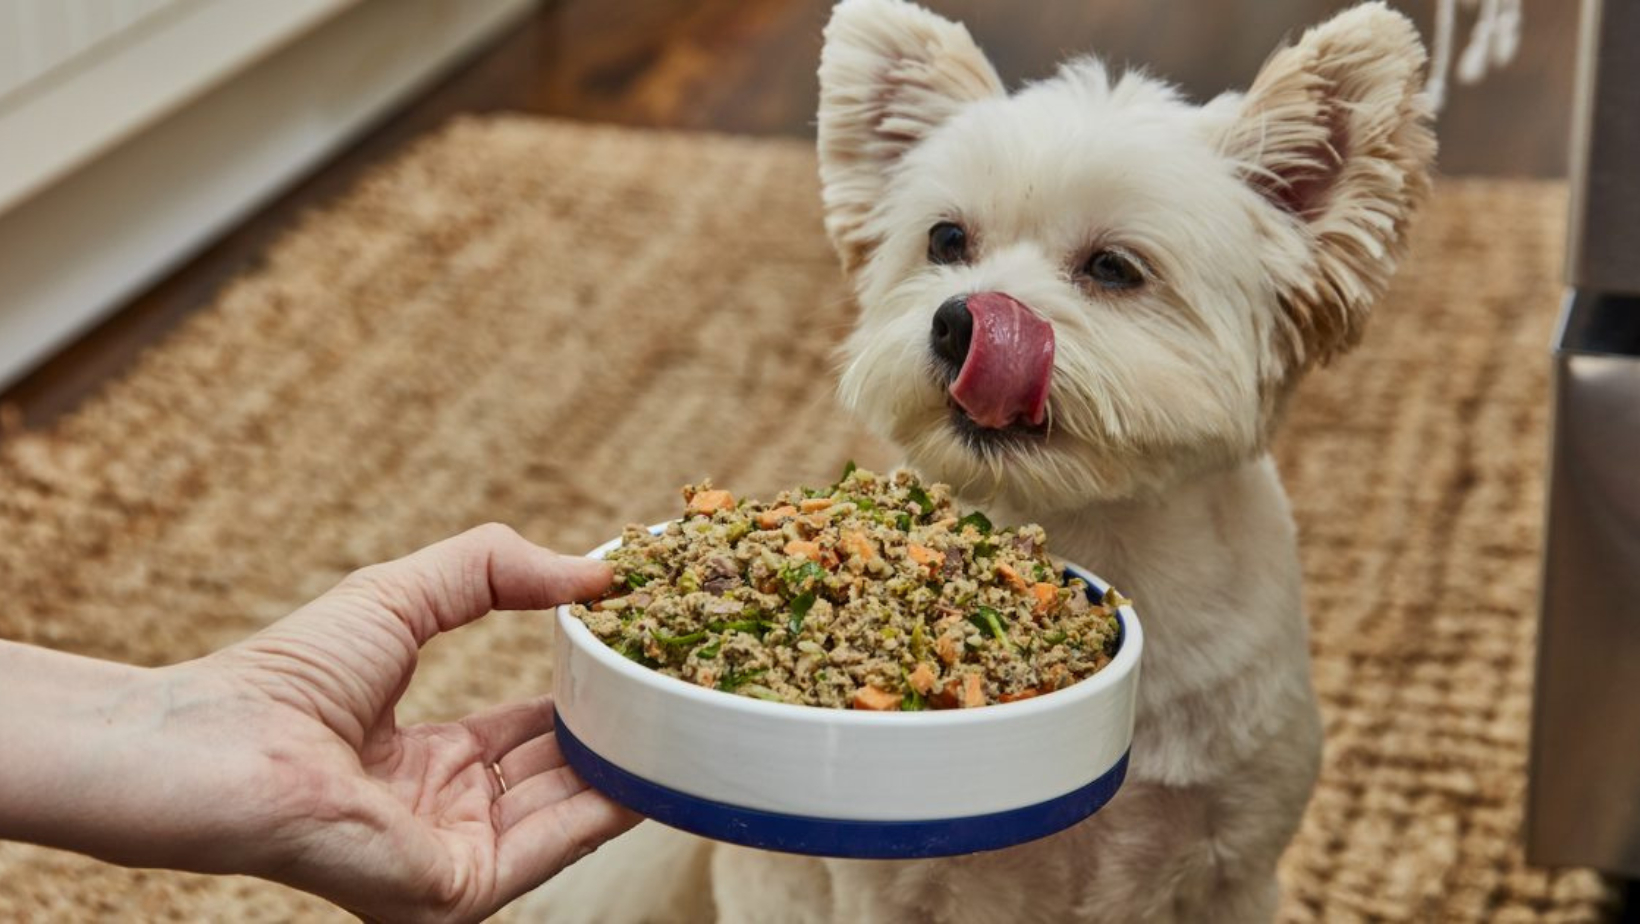 How to Prepare Home Cooked Food for Your Dog